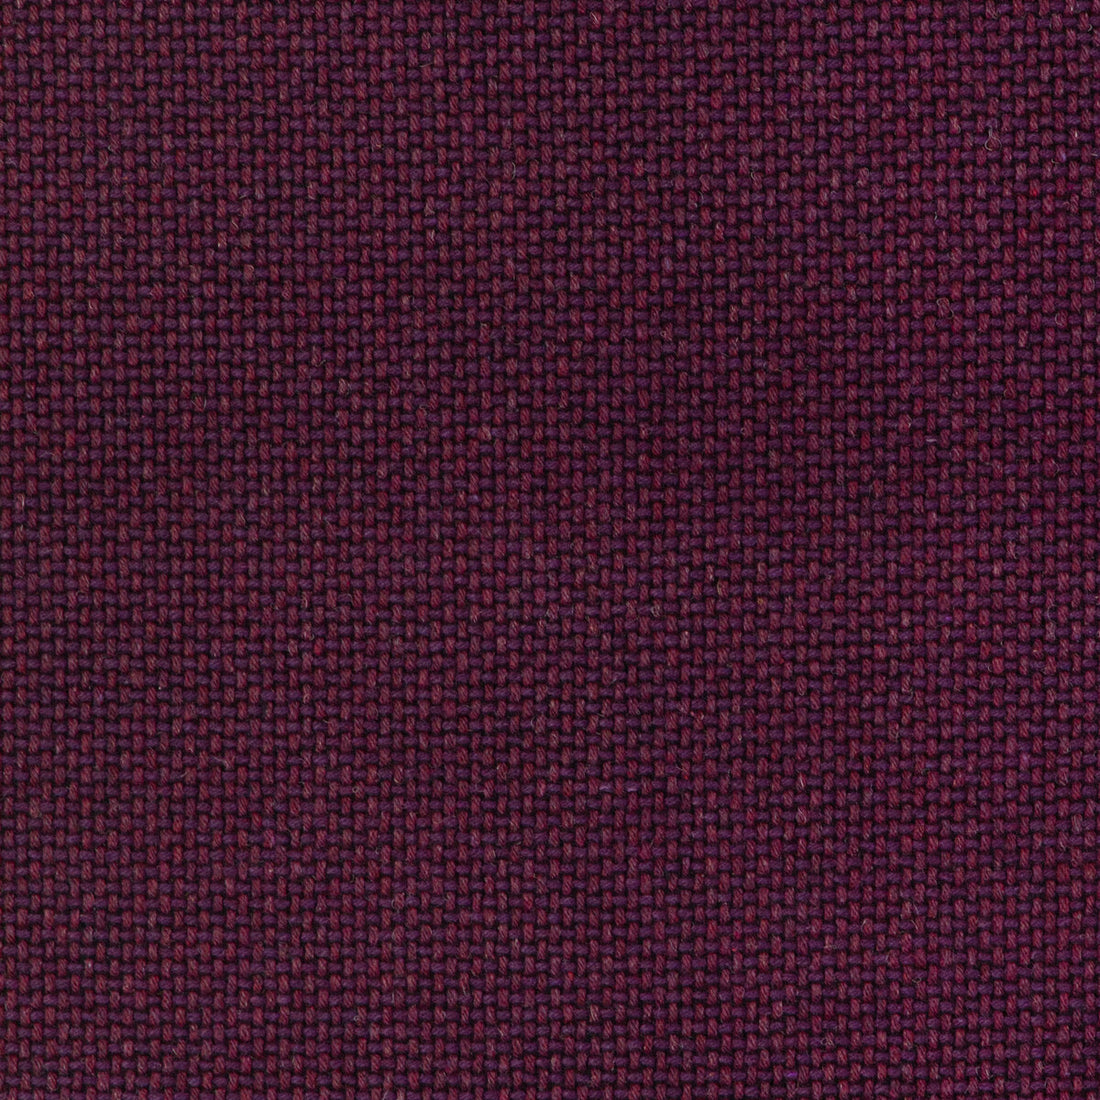 Easton Wool fabric in blackberry color - pattern 37027.910.0 - by Kravet Contract